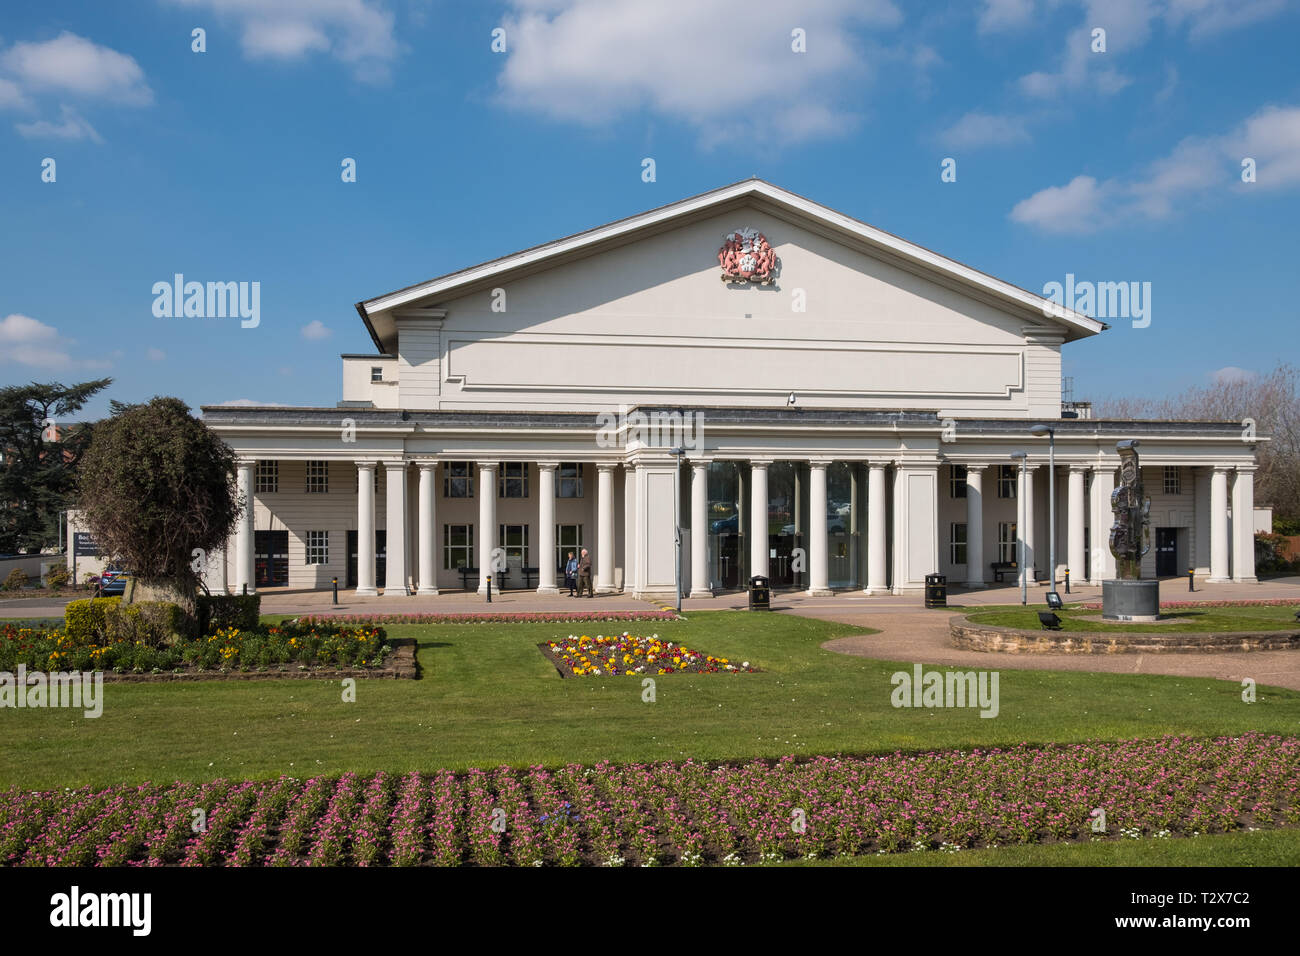 The De Montfort Hall live music and entertainment venue in Leicester, UK Stock Photo